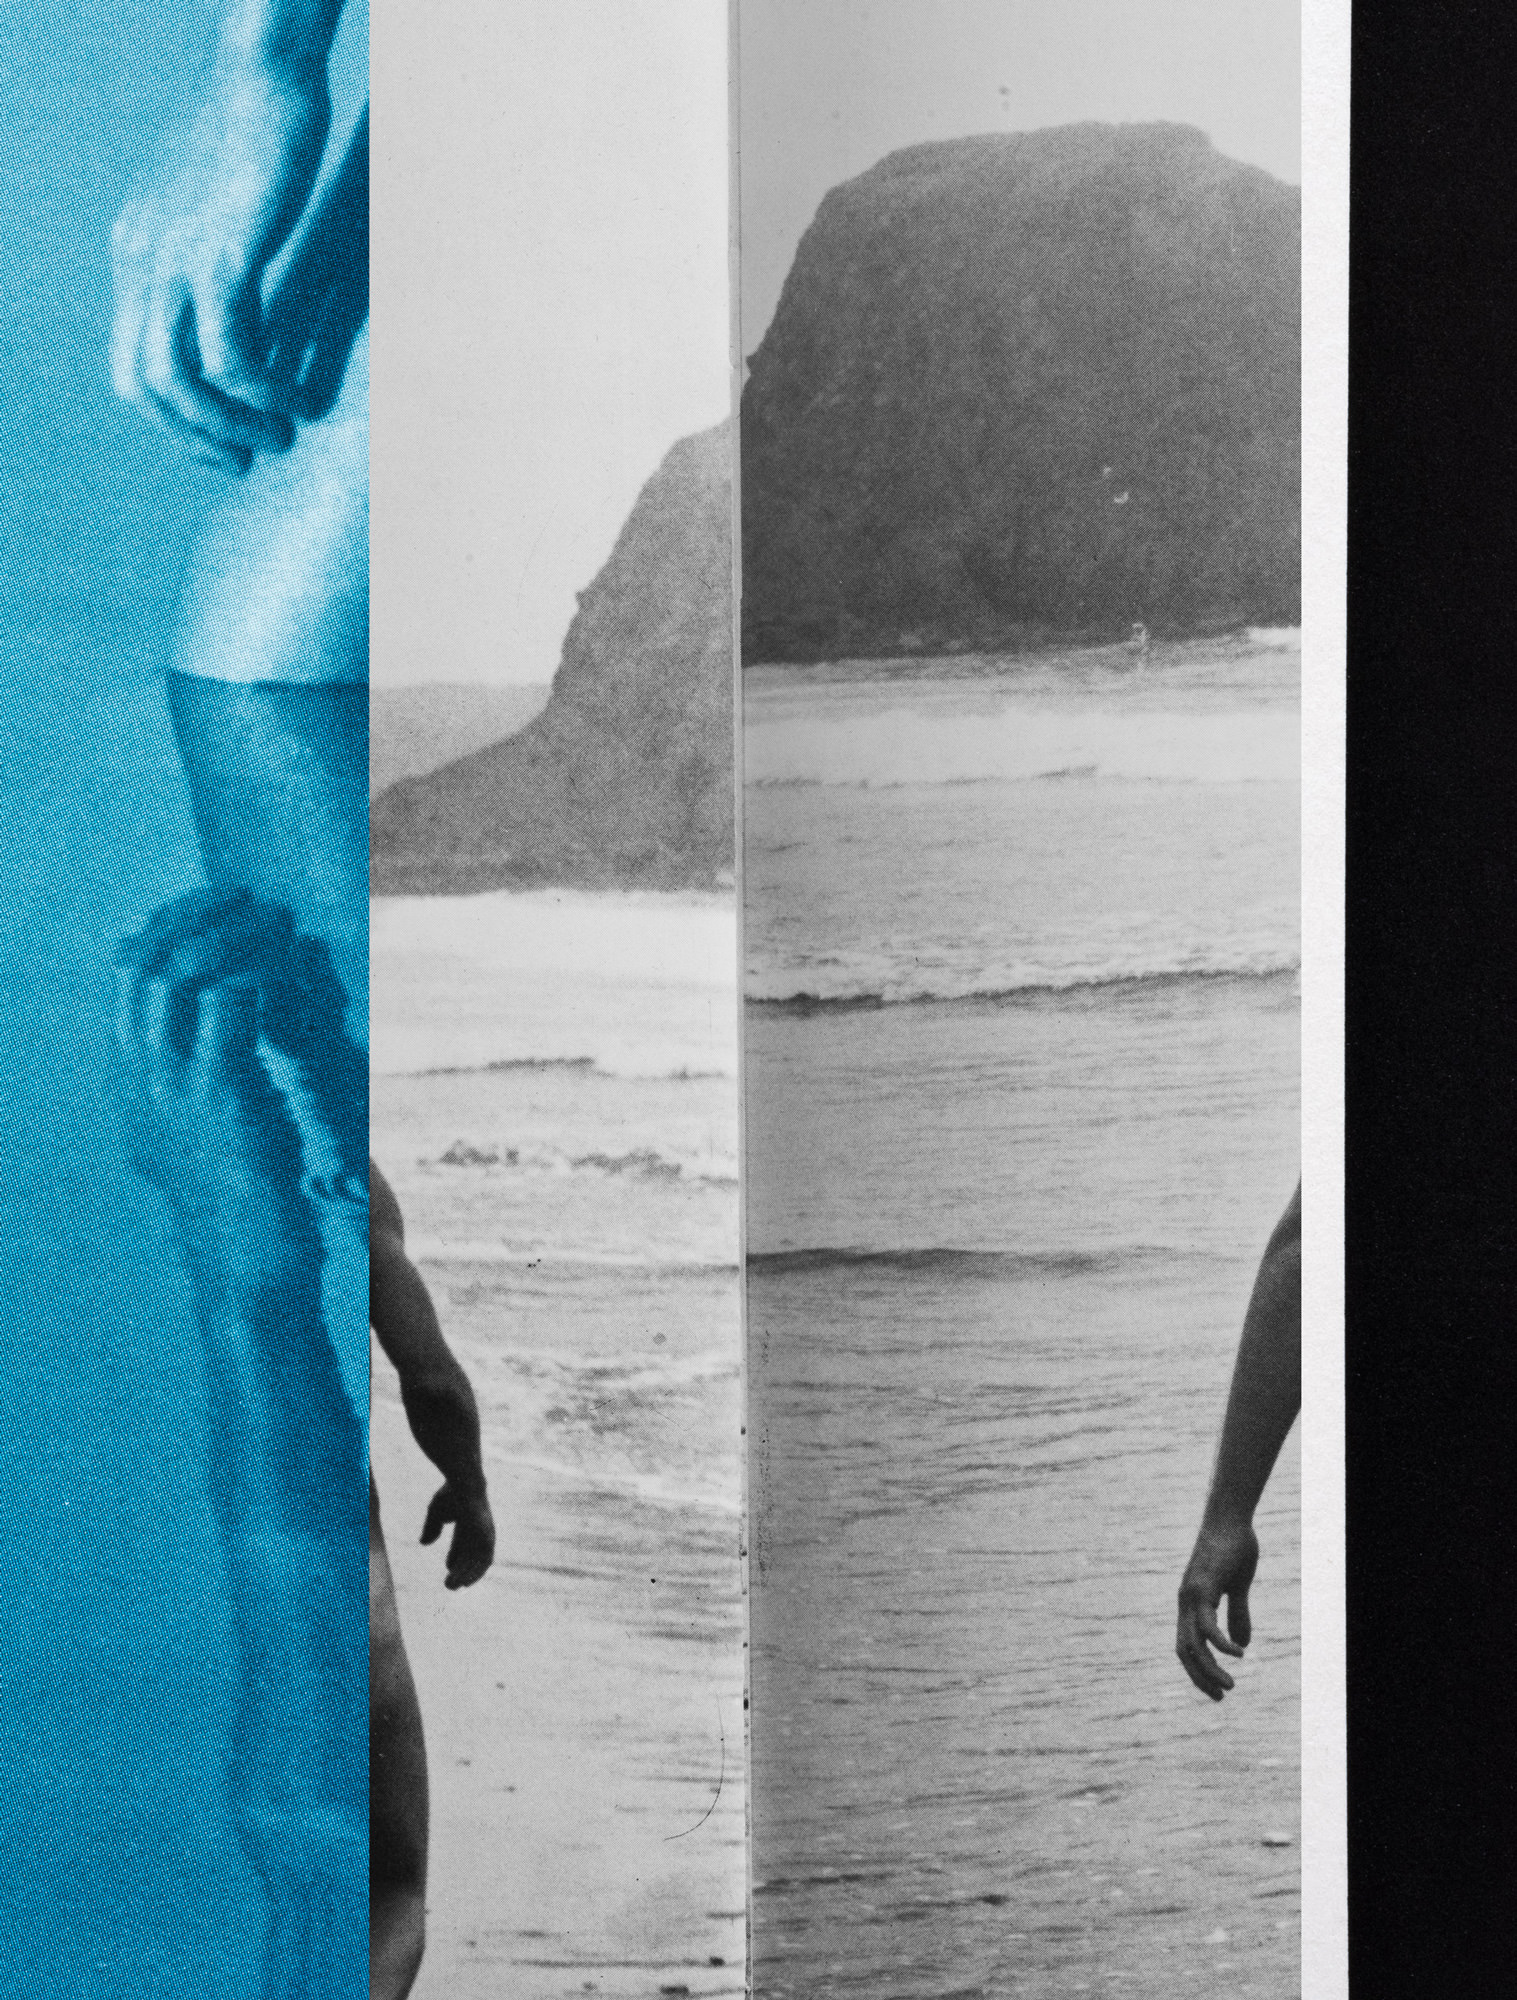 Image description: Photography collage featuring crops of a man’s body walking along the water. Art by Pacifico Silano.